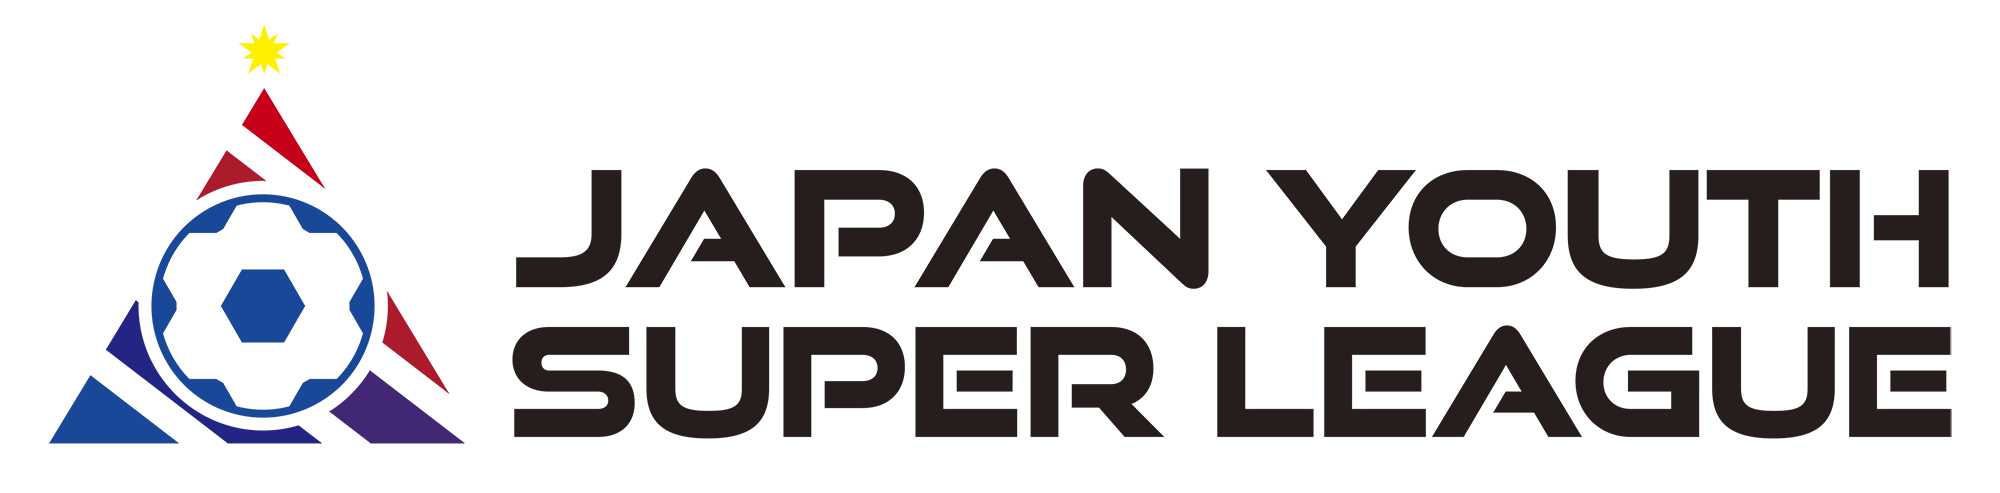 JAPAN YOUTH SUPER LEAGUE Supported by PUMA